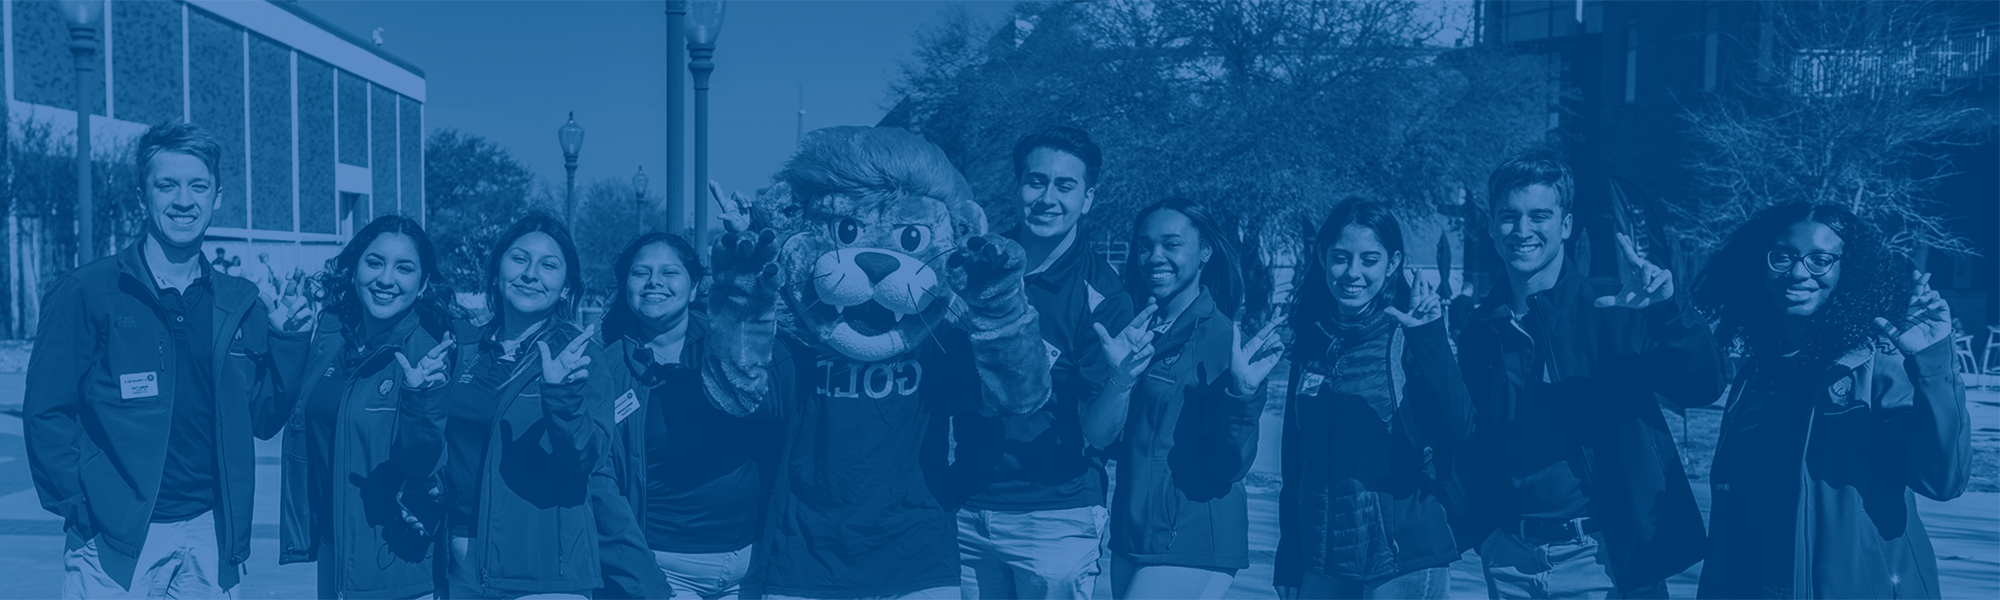 Our Lion Ambassadors with Lucky, A&M-Commerce's mascot